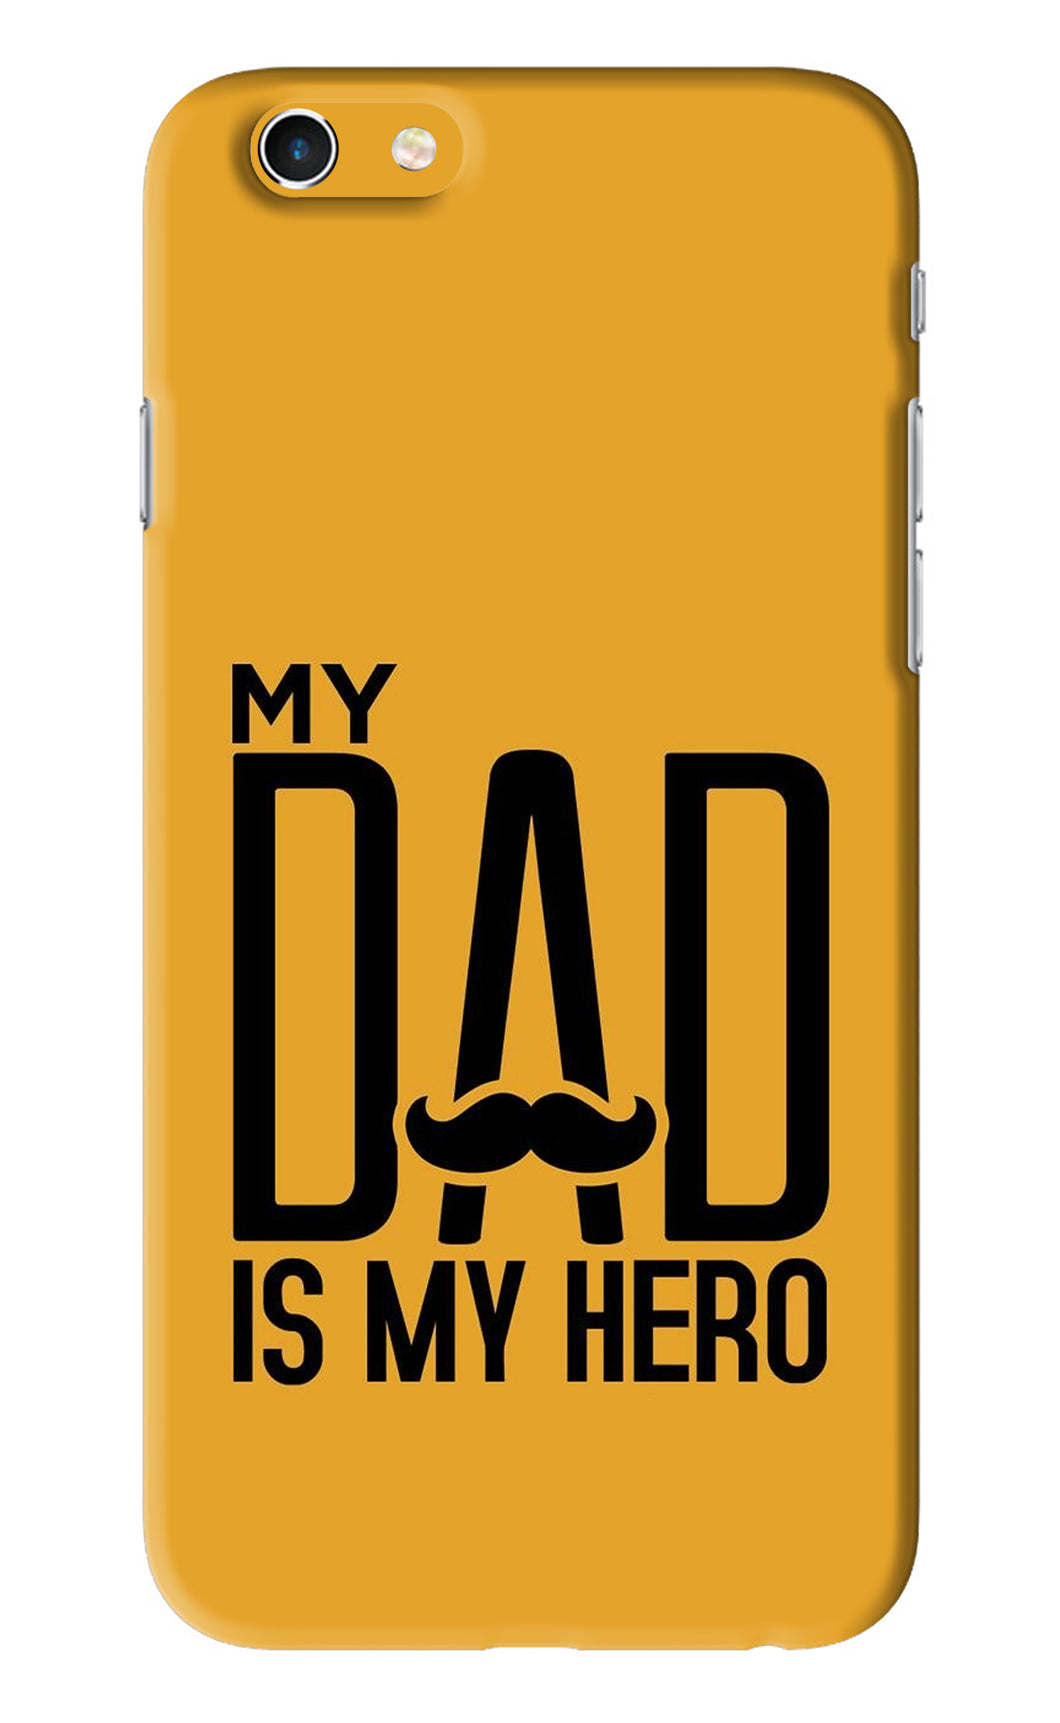 My Dad Is My Hero iPhone 6S Back Skin Wrap